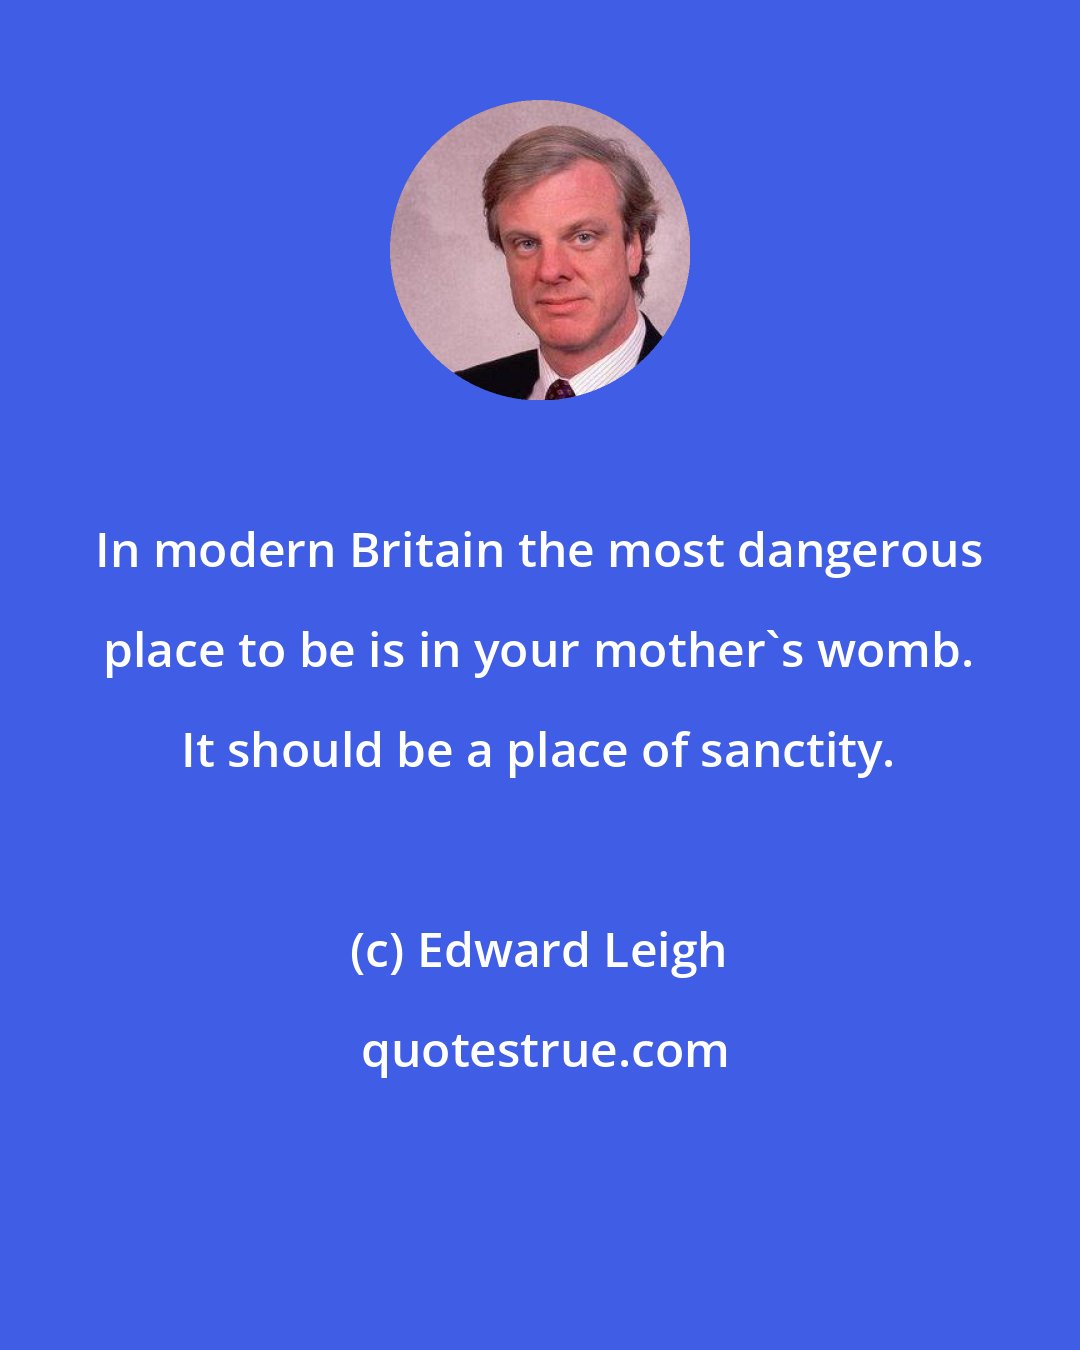 Edward Leigh: In modern Britain the most dangerous place to be is in your mother's womb. It should be a place of sanctity.